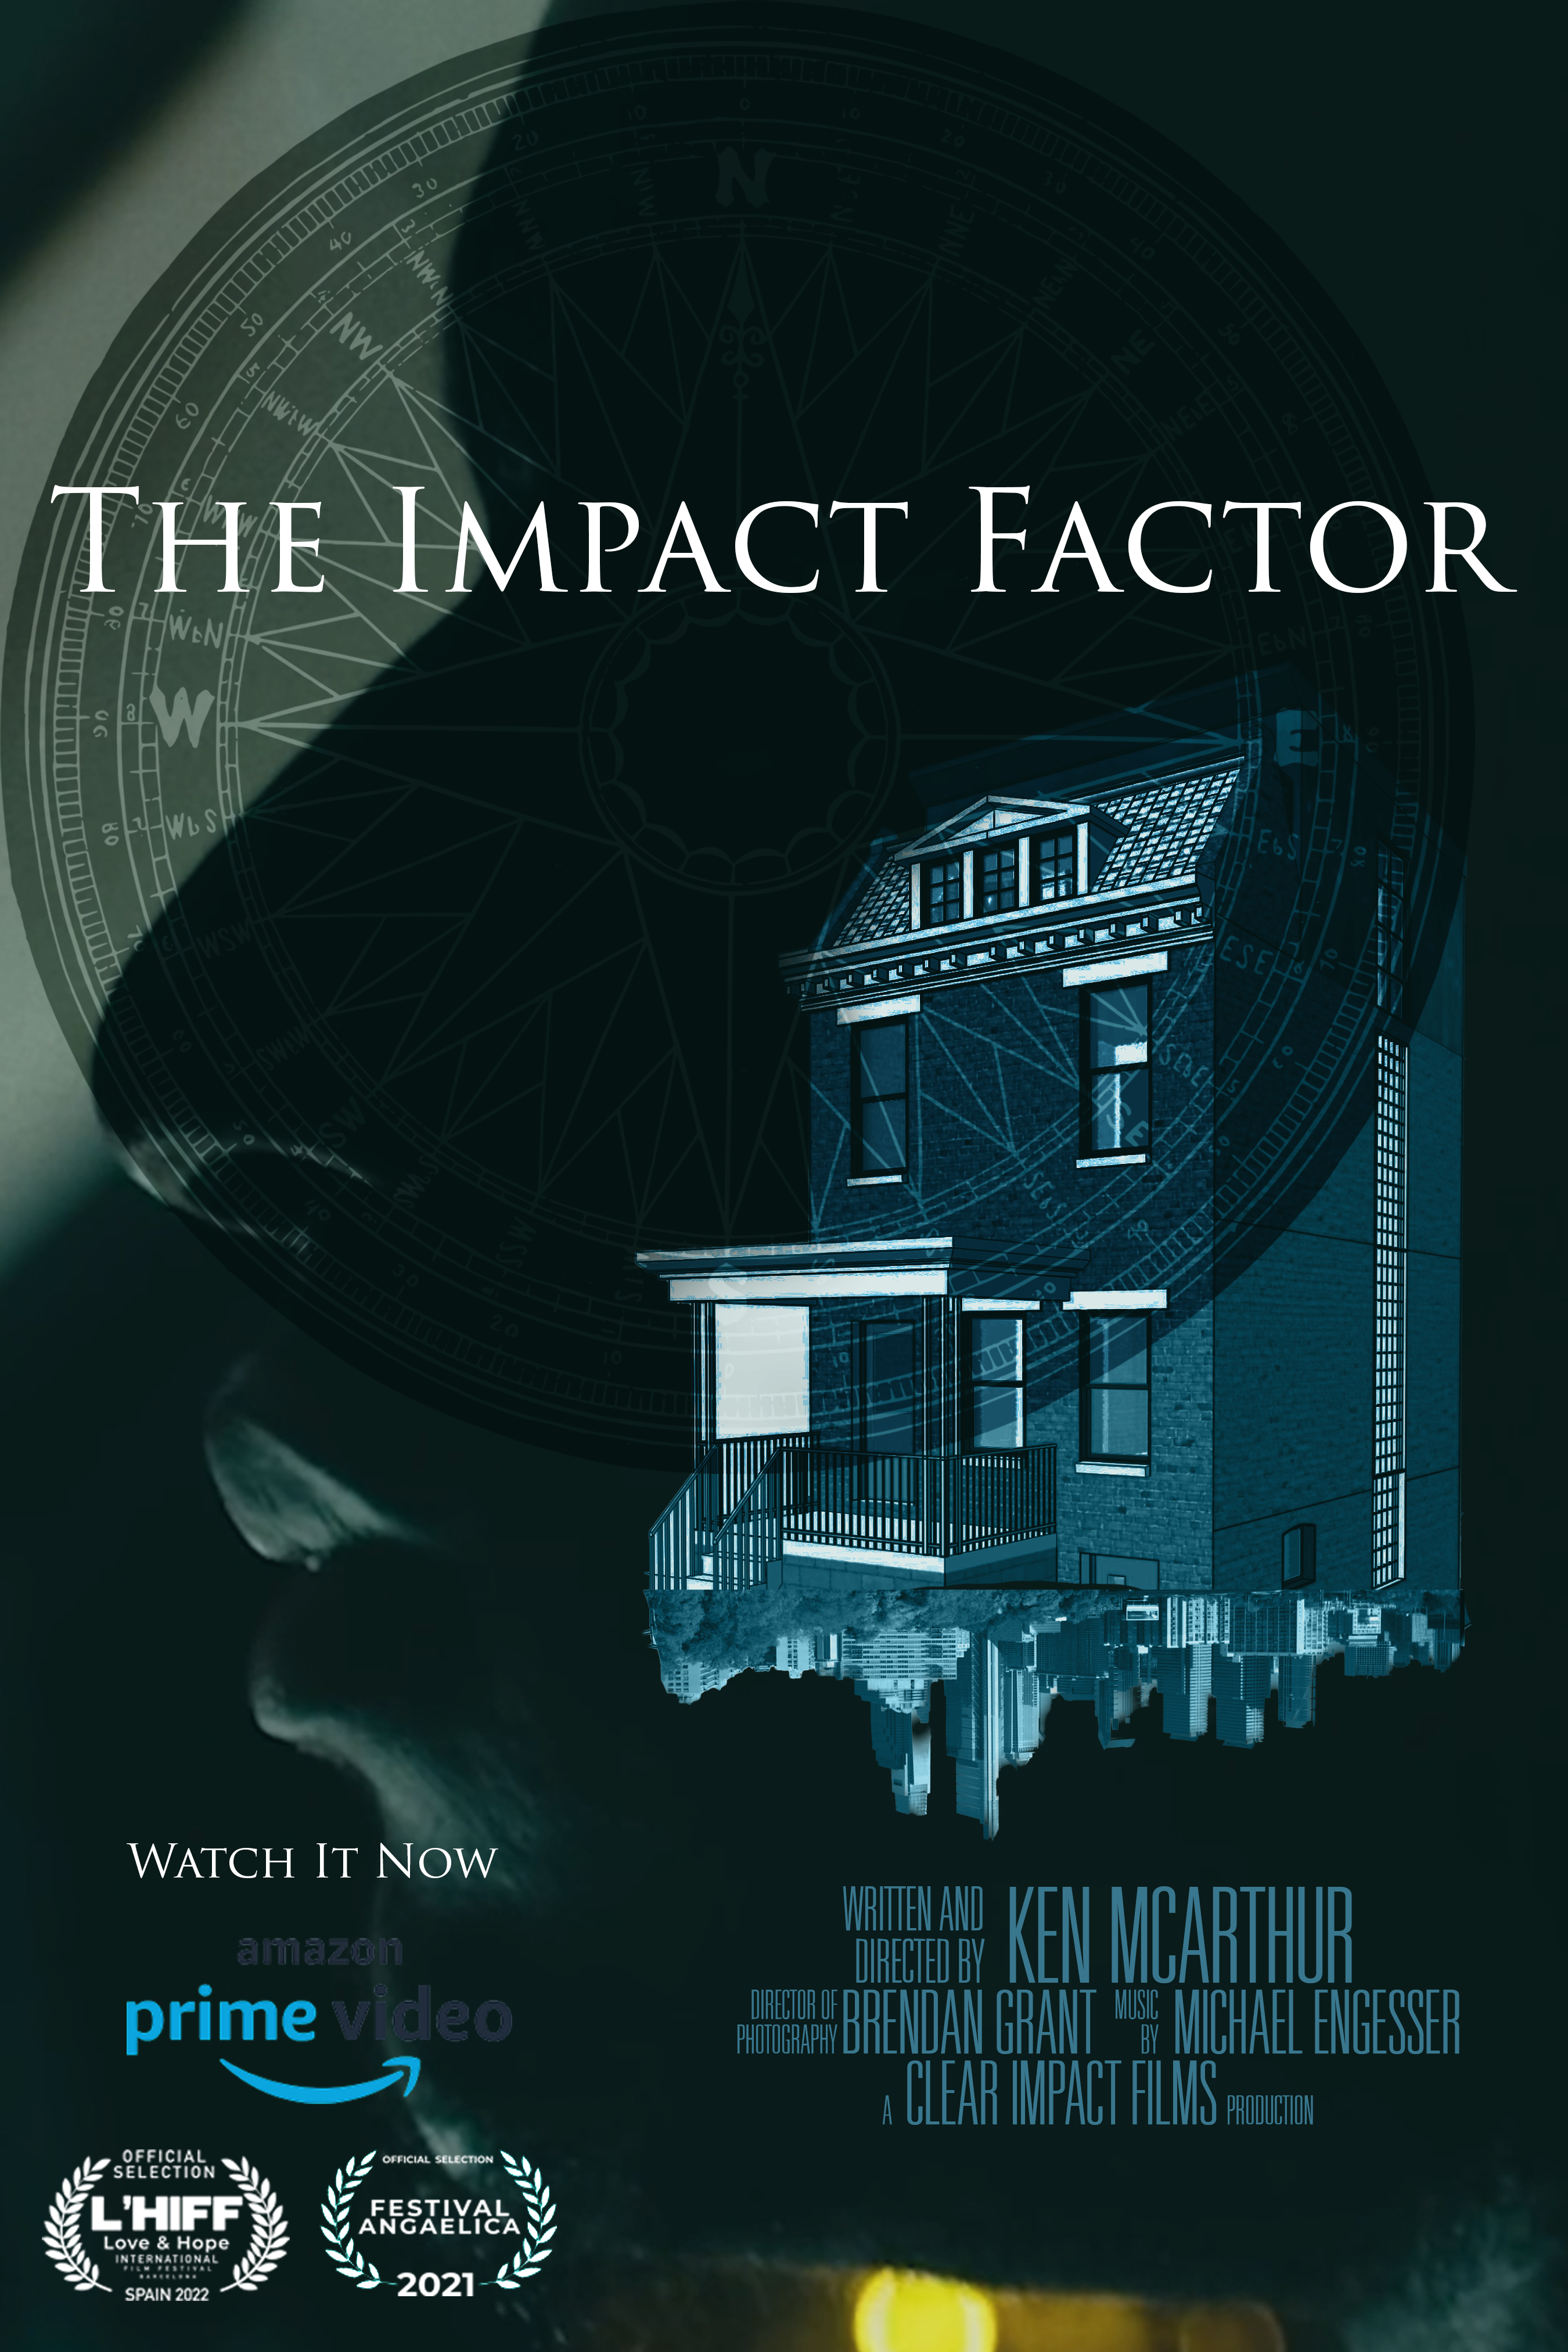 The Impact Factor Movie Is Now on Amazon